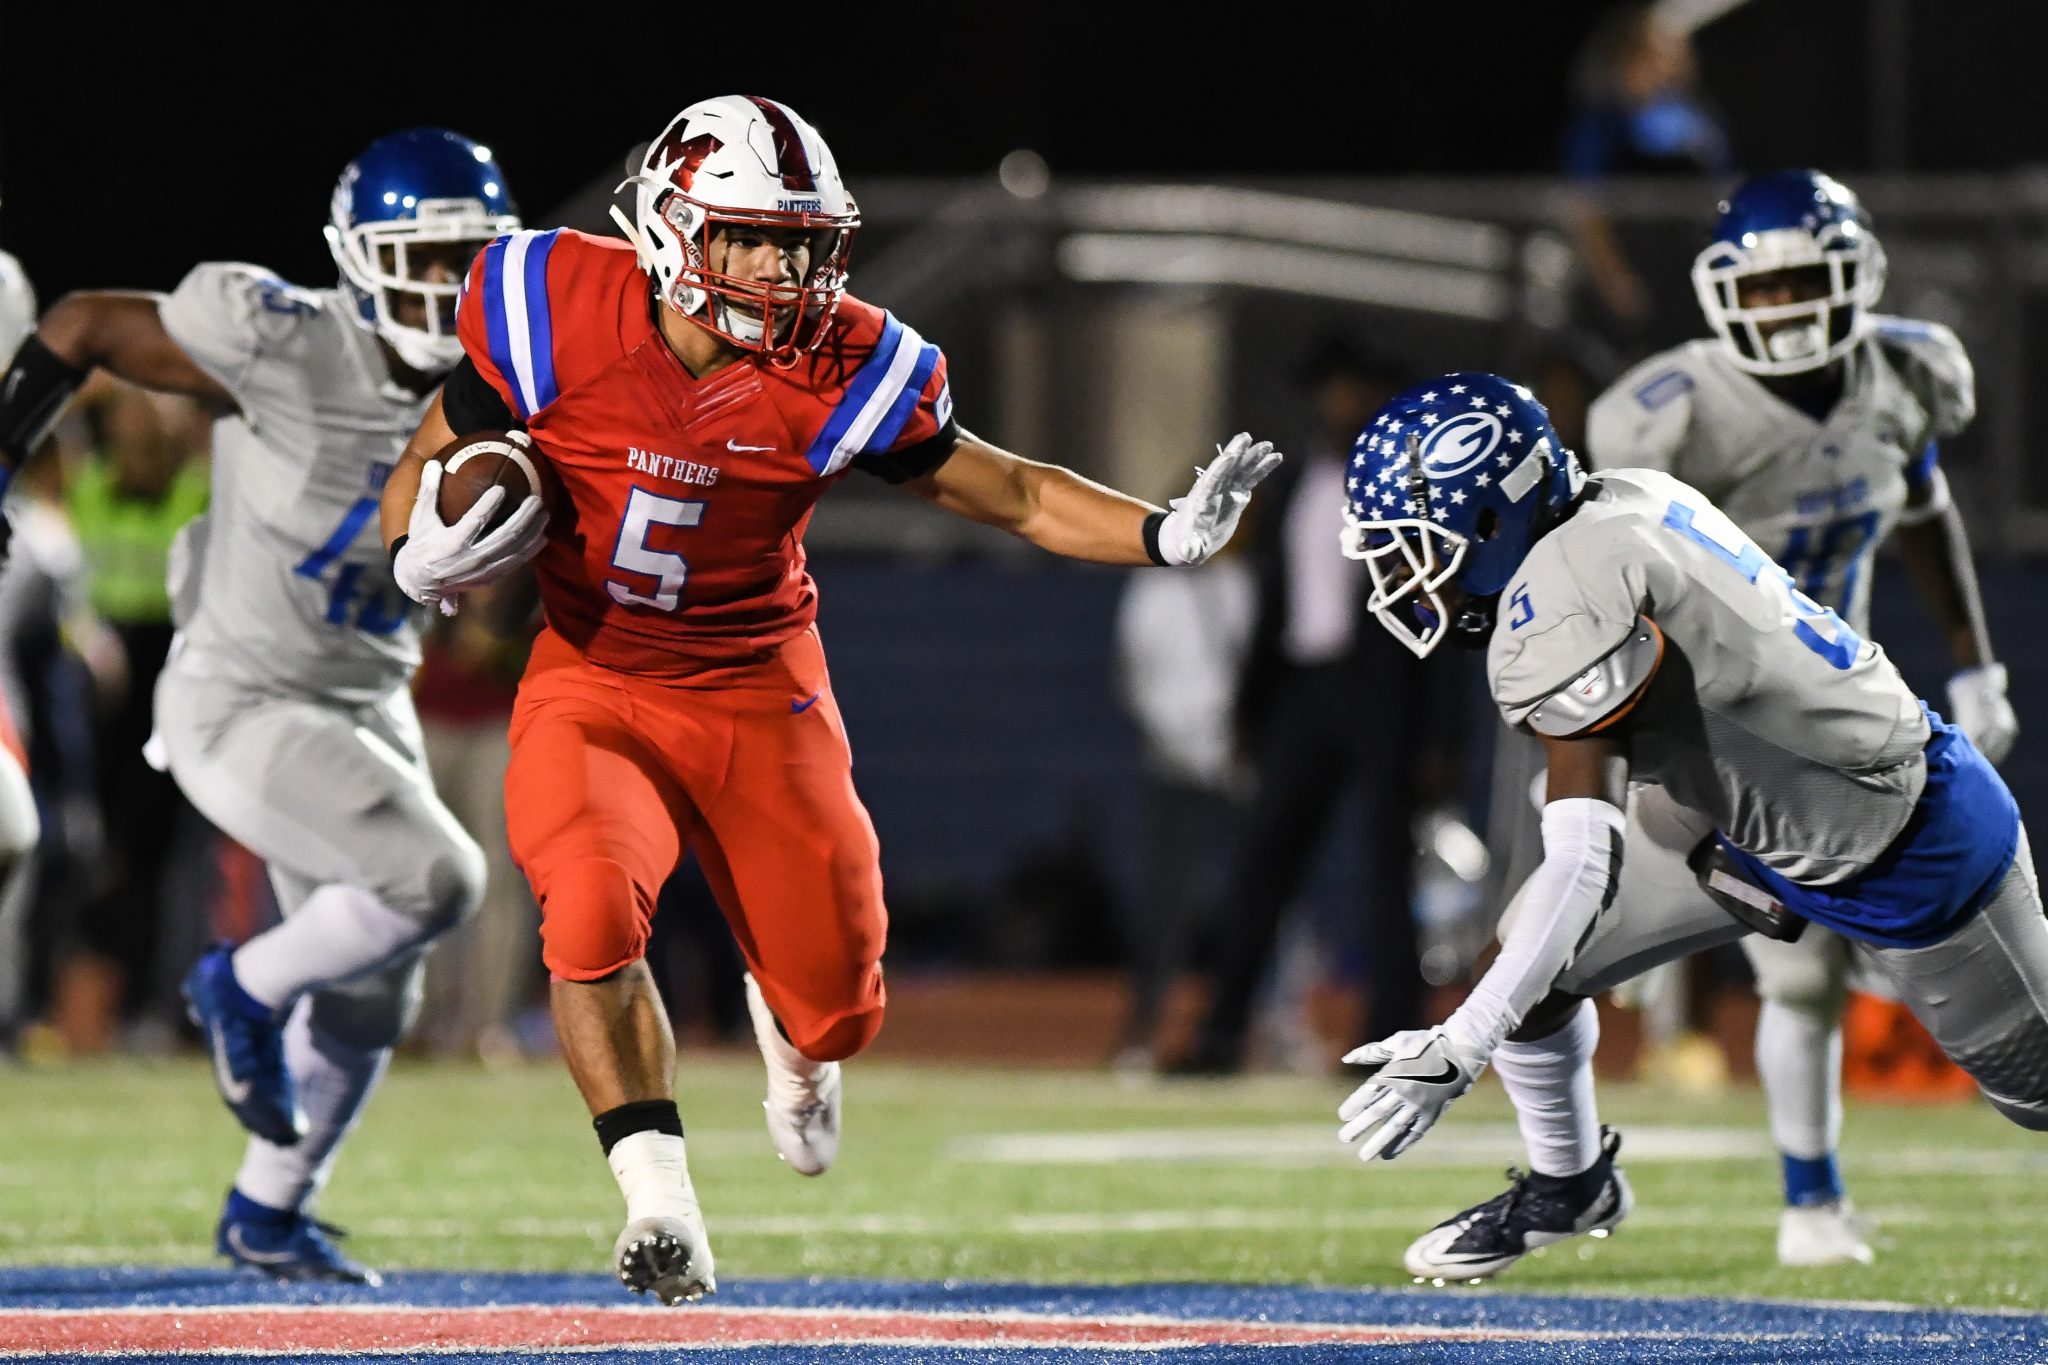 What To Watch For As Waco Midway Takes On Mansfield | Texas HS Football